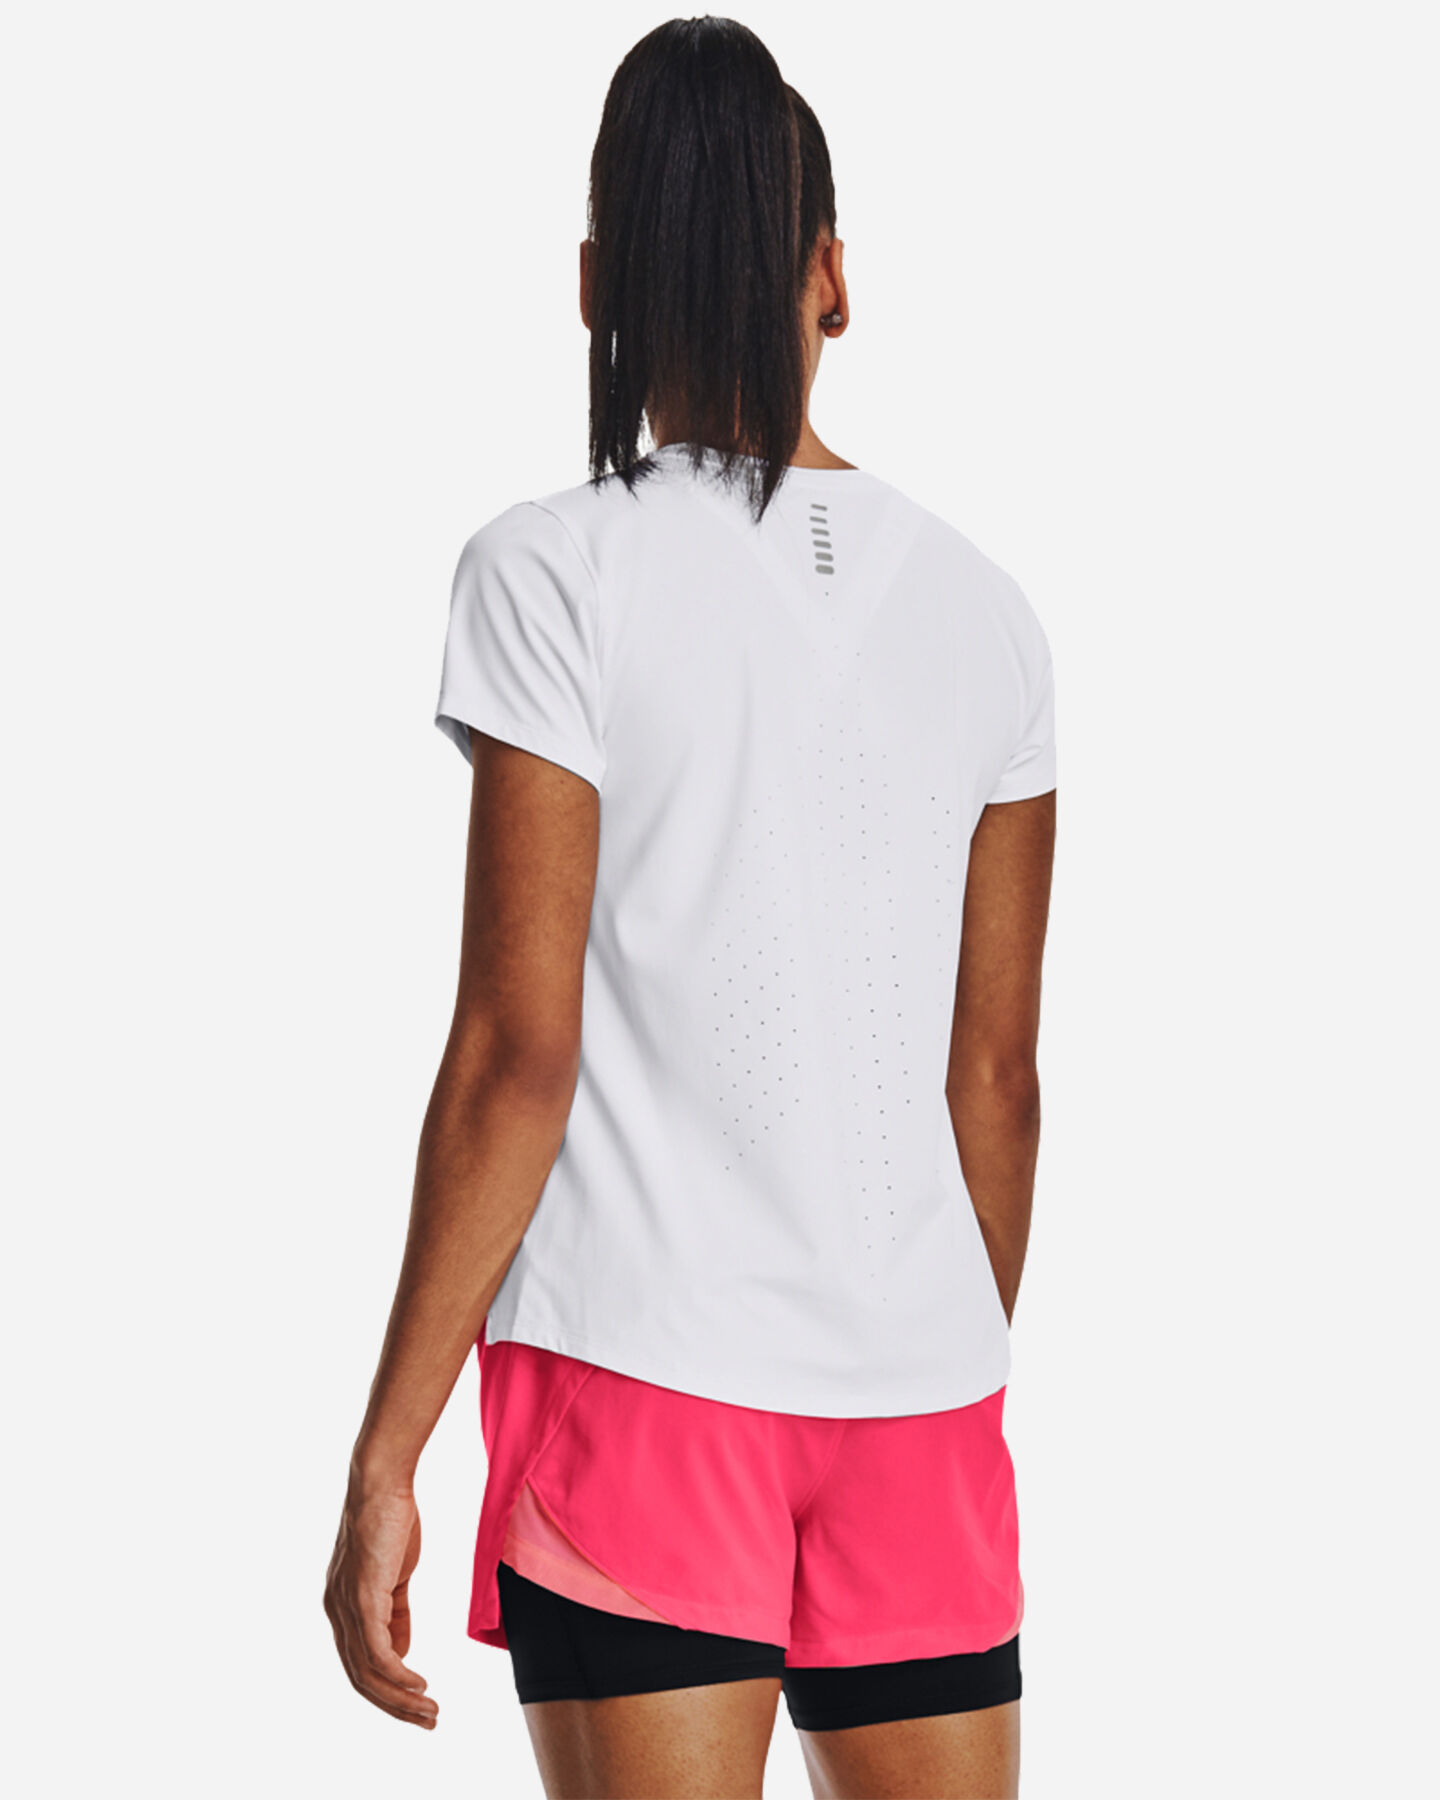  T-Shirt running UNDER ARMOUR ISO-CHILL LASER W S5528549|0100|LG scatto 1